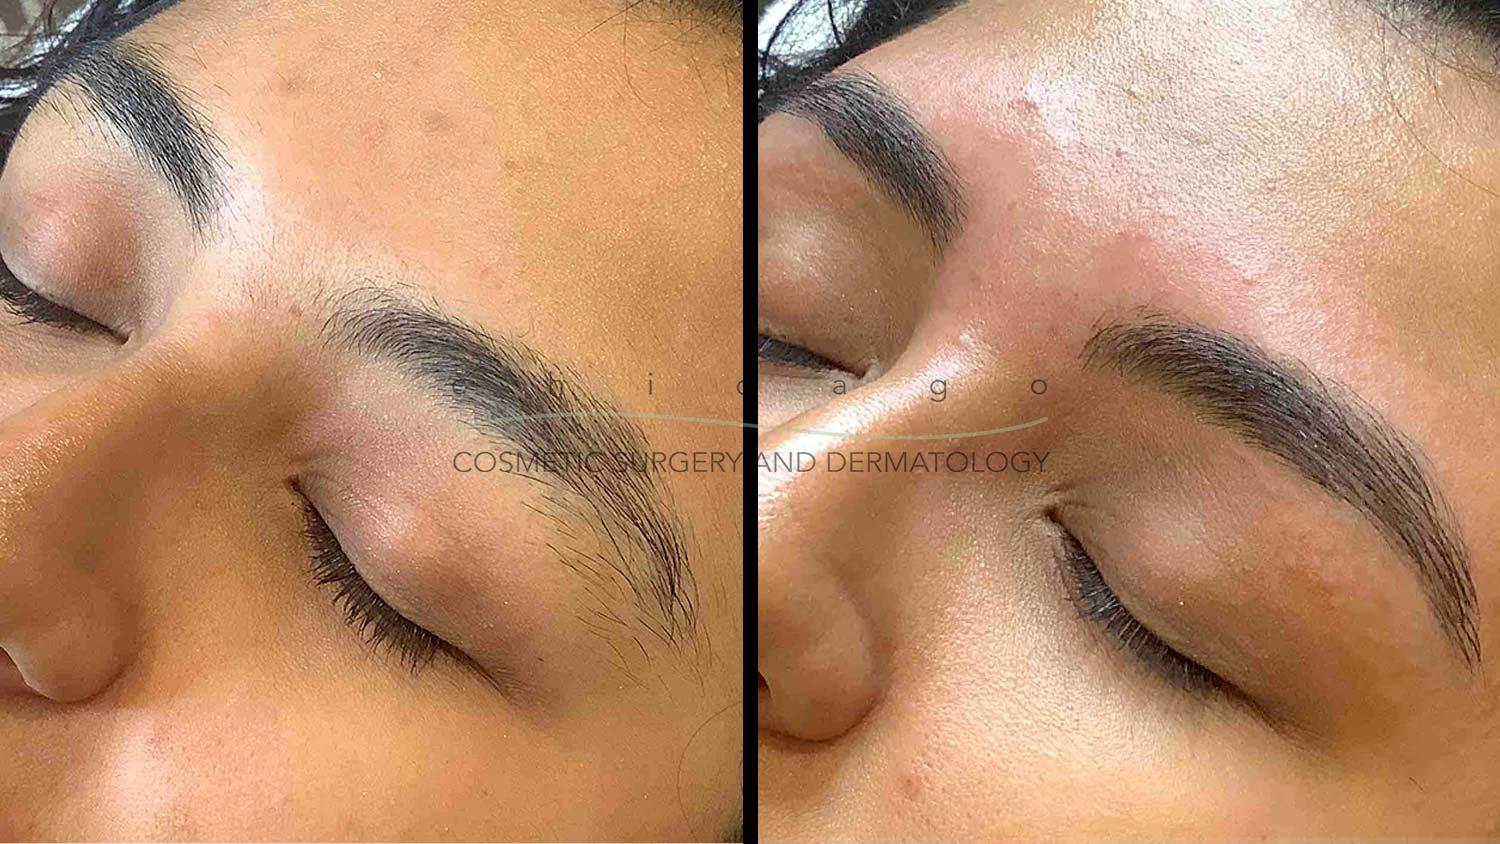 Eyebrow wax and tint before and after